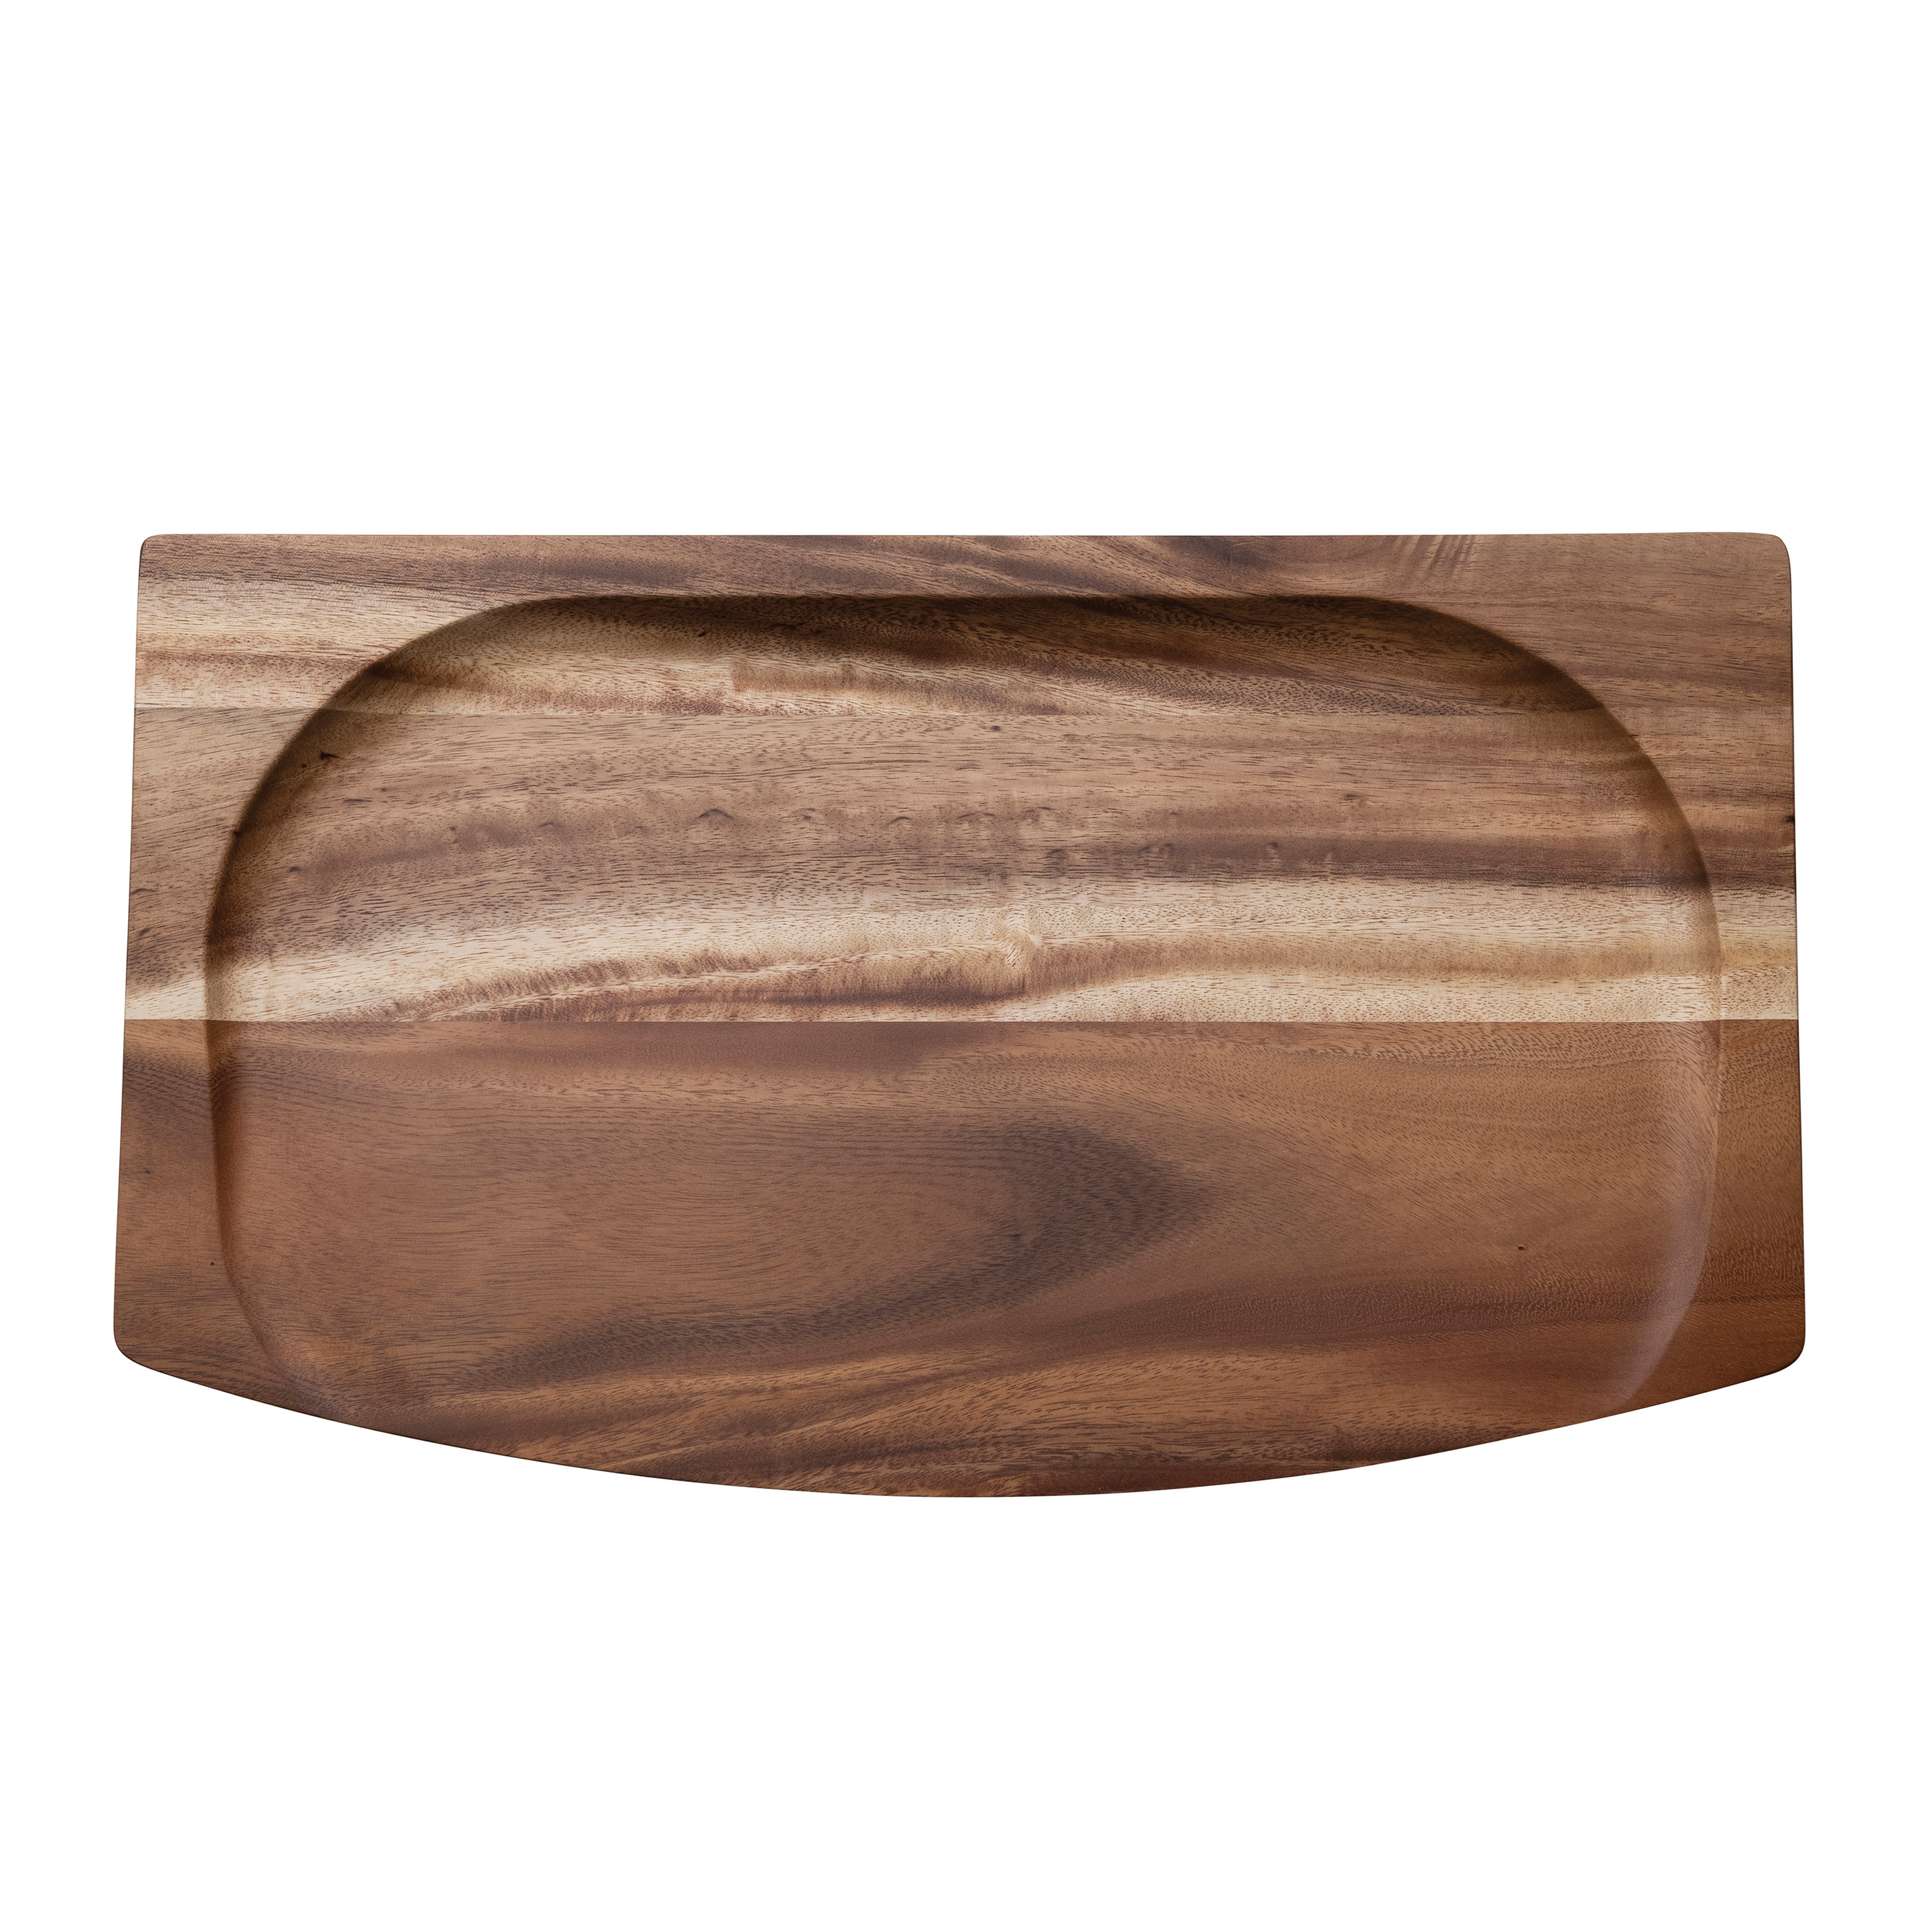 Footed Wood Serving Tray with Raised Edge, Natural - Image 0